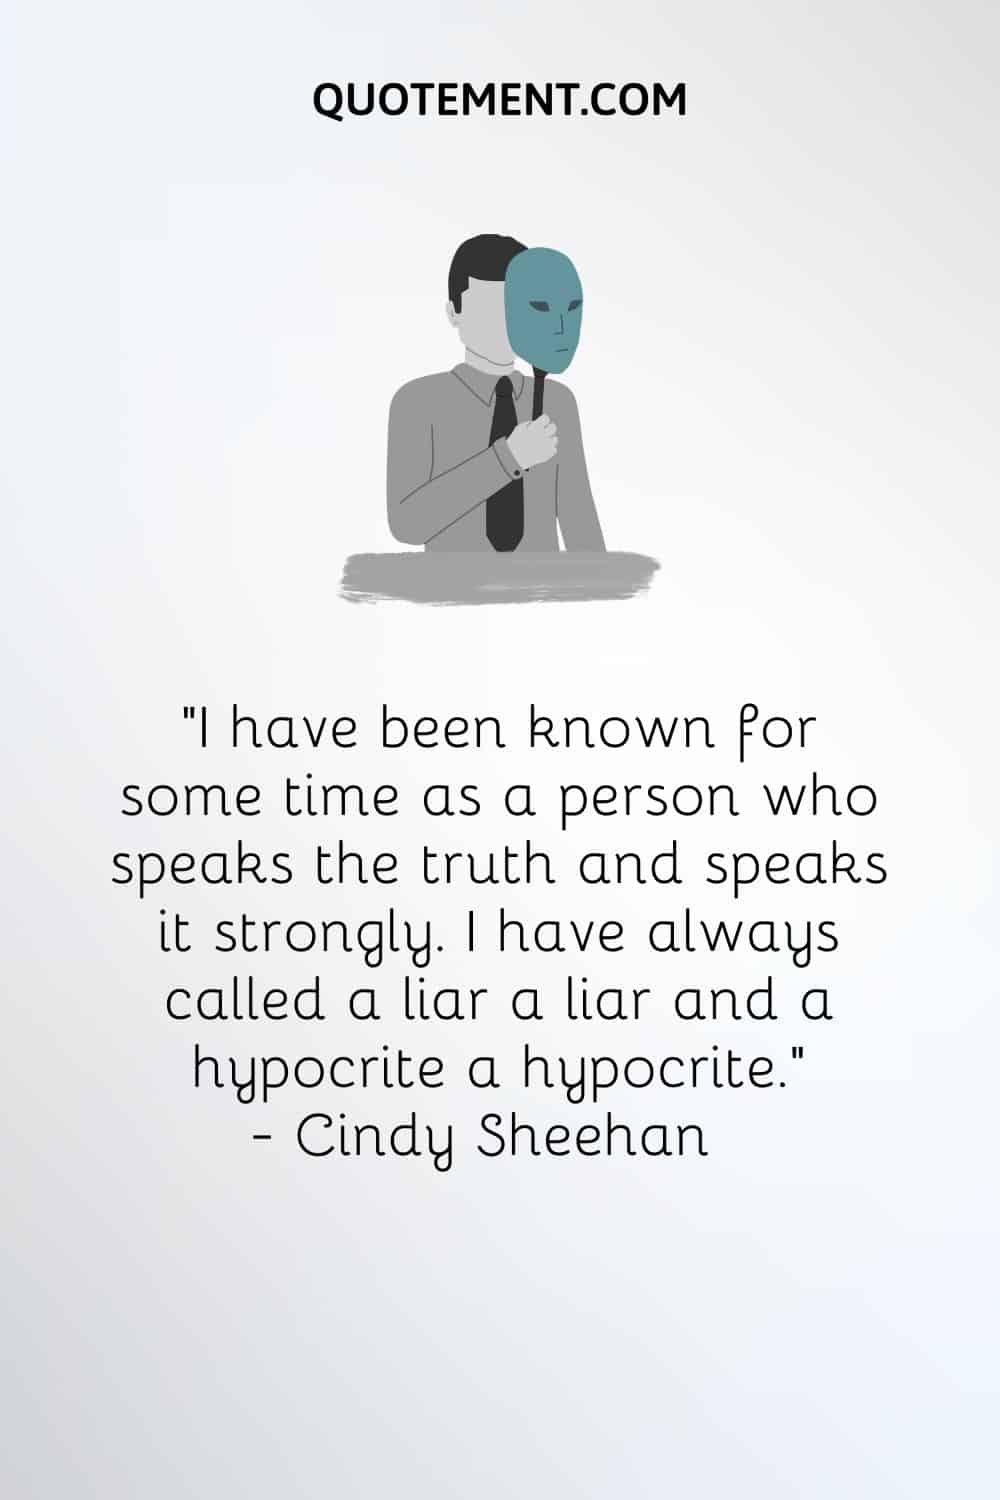 “I have been known for some time as a person who speaks the truth and speaks it strongly. I have always called a liar a liar and a hypocrite a hypocrite.” ― Cindy Sheehan